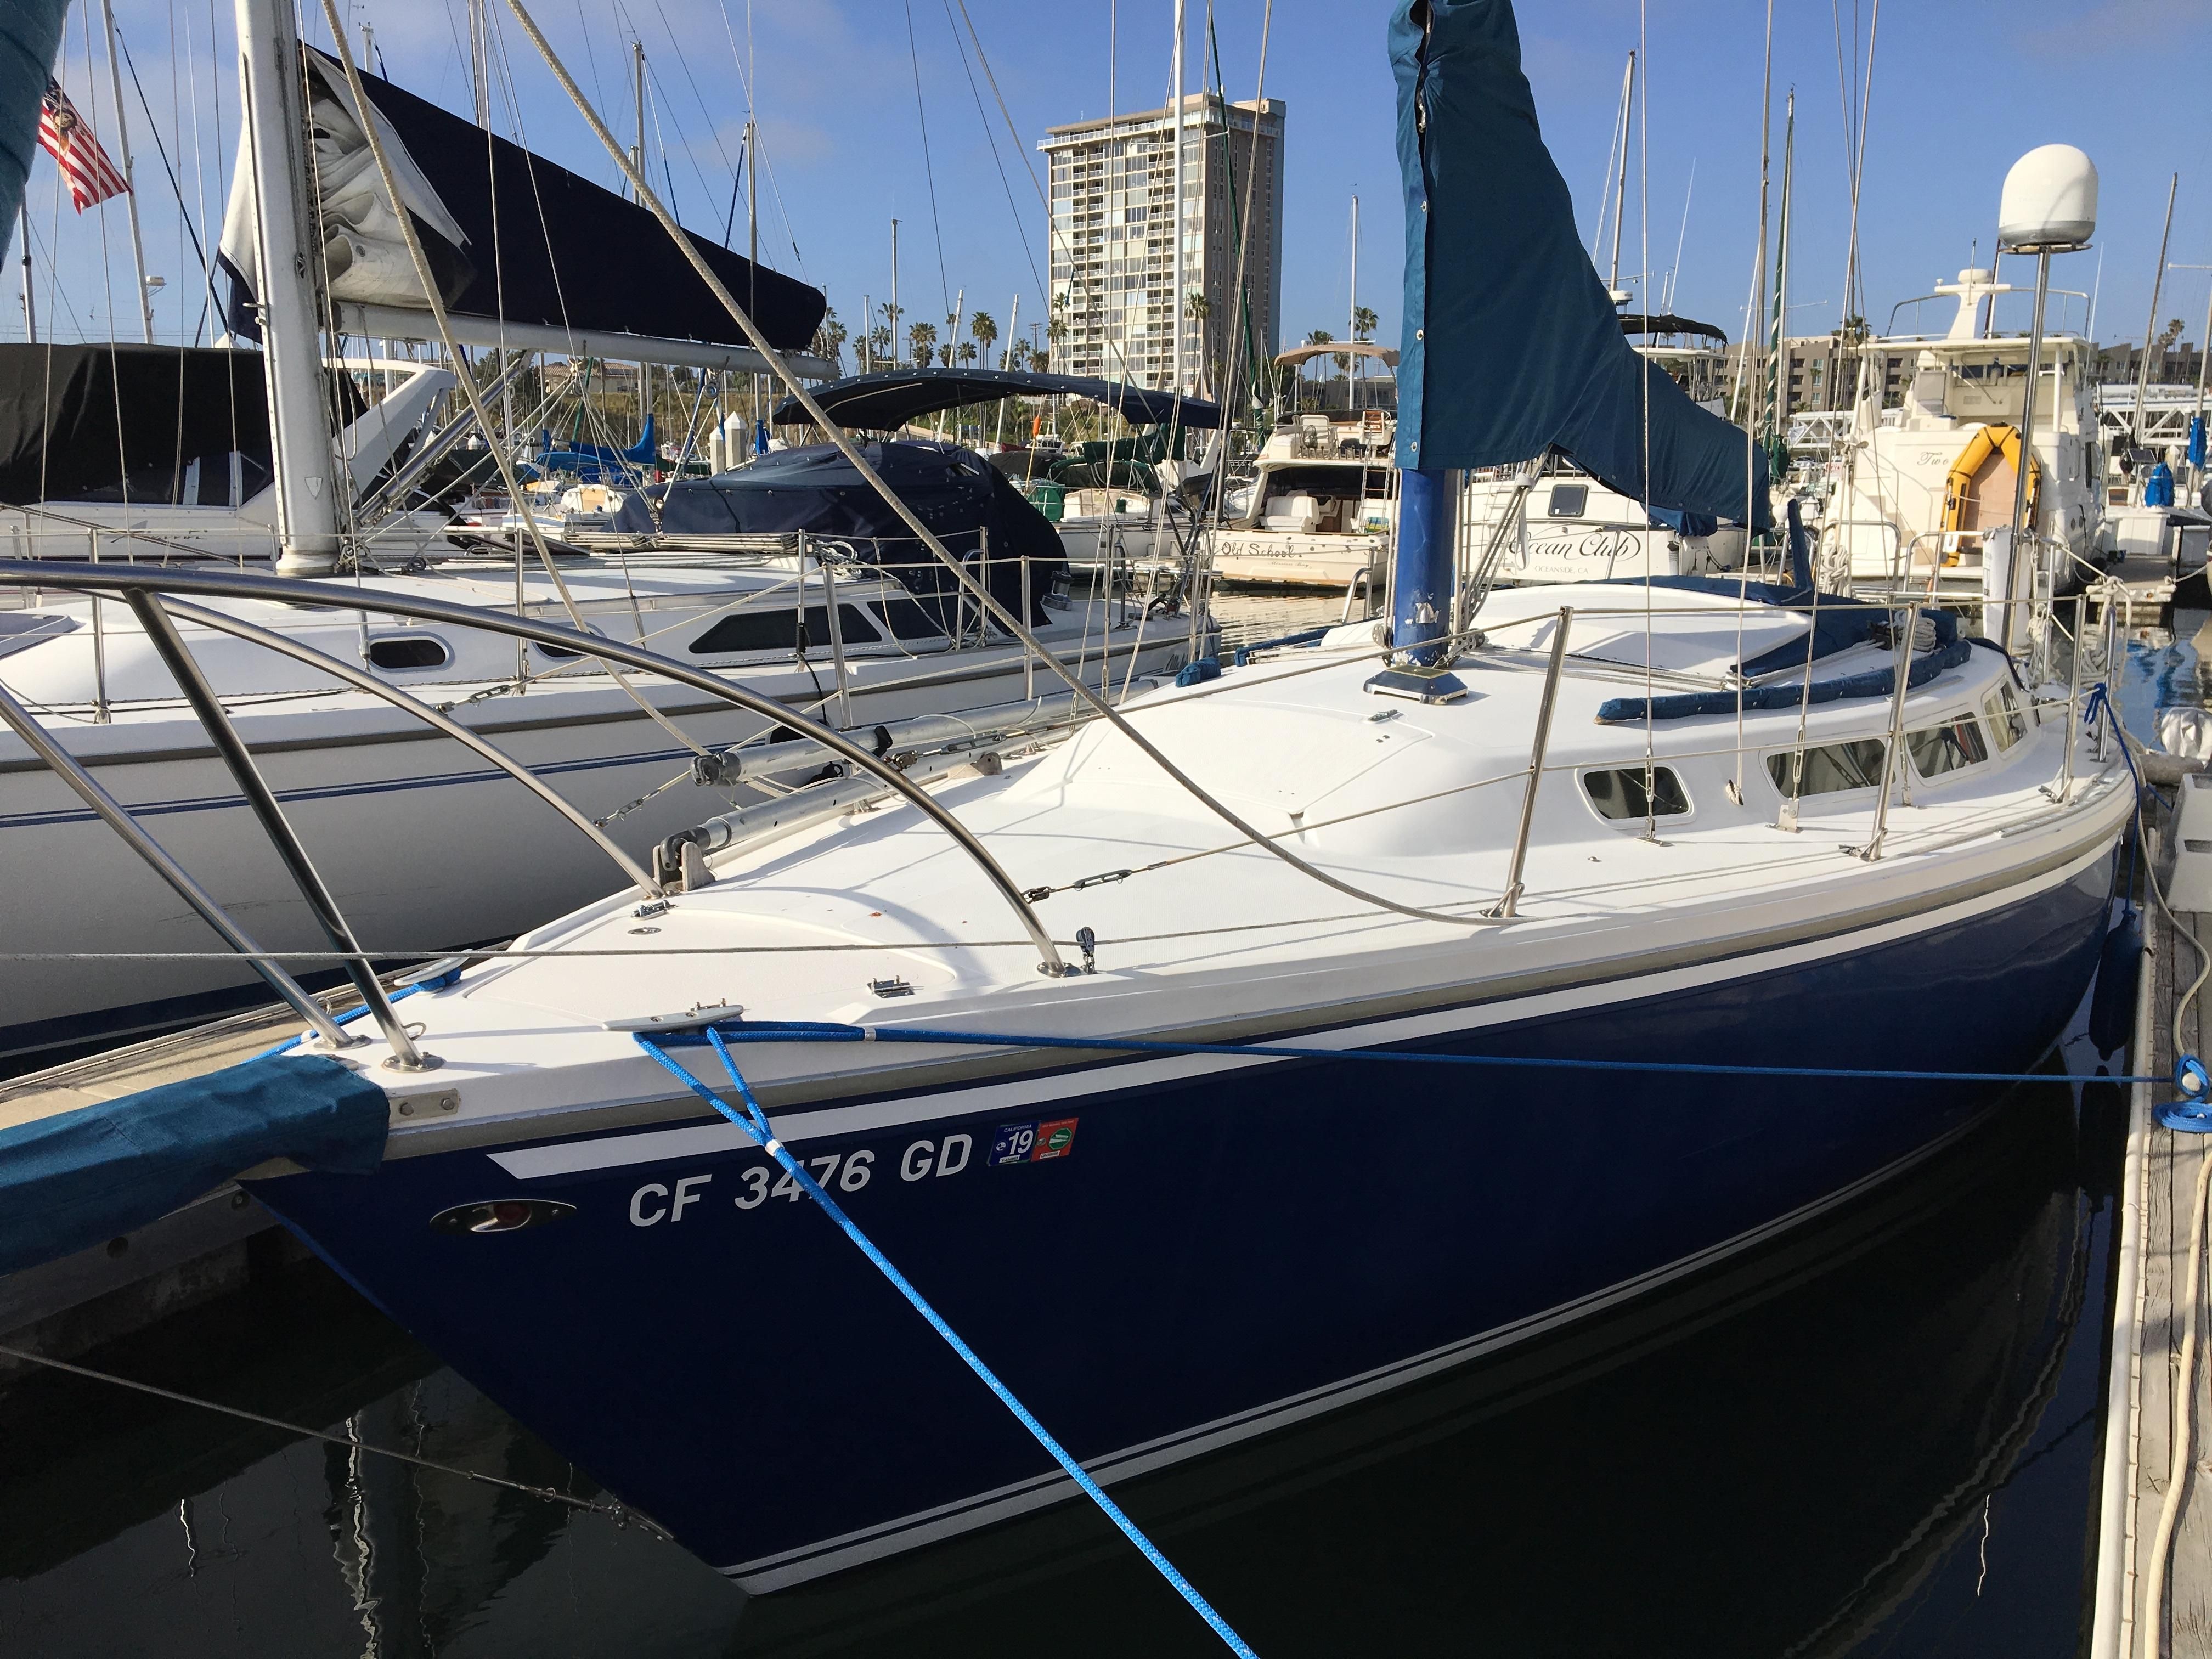 30 foot catalina sailboat for sale